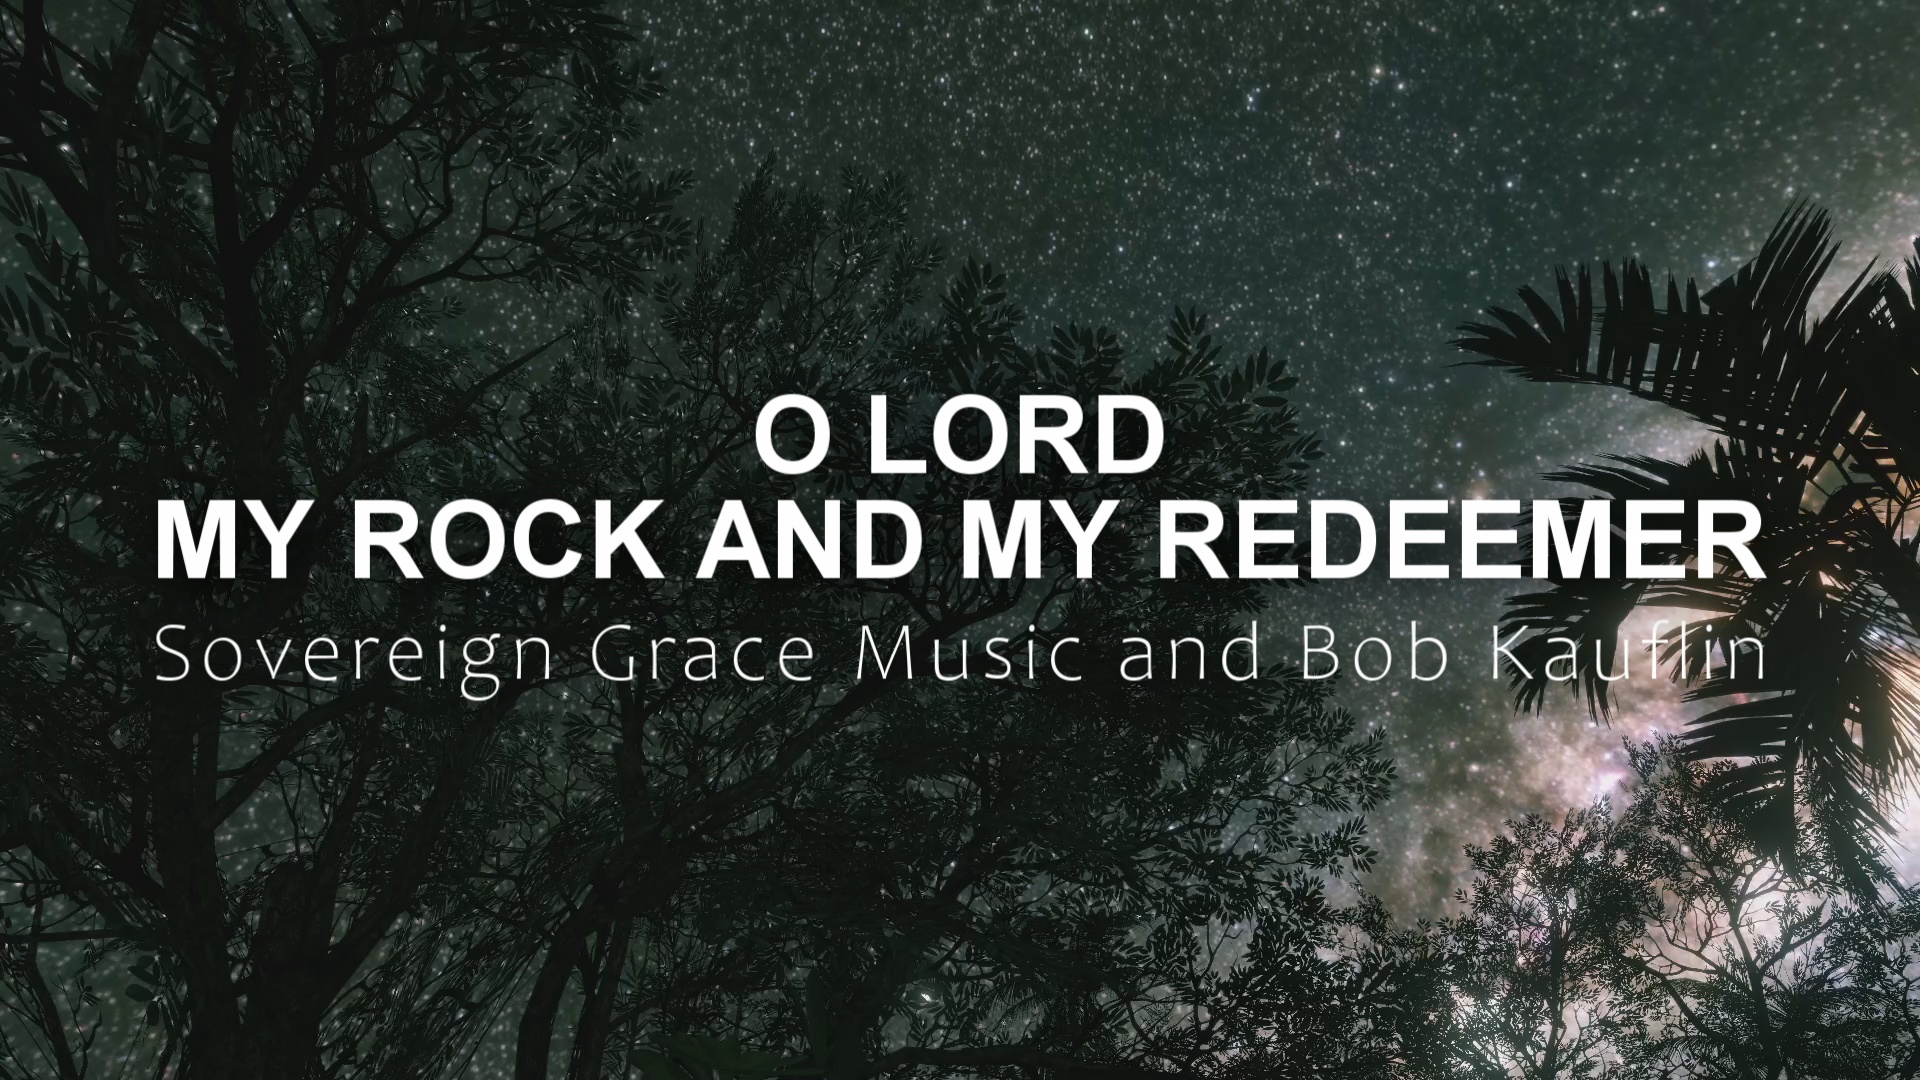 O Lord my rock and my redeemer